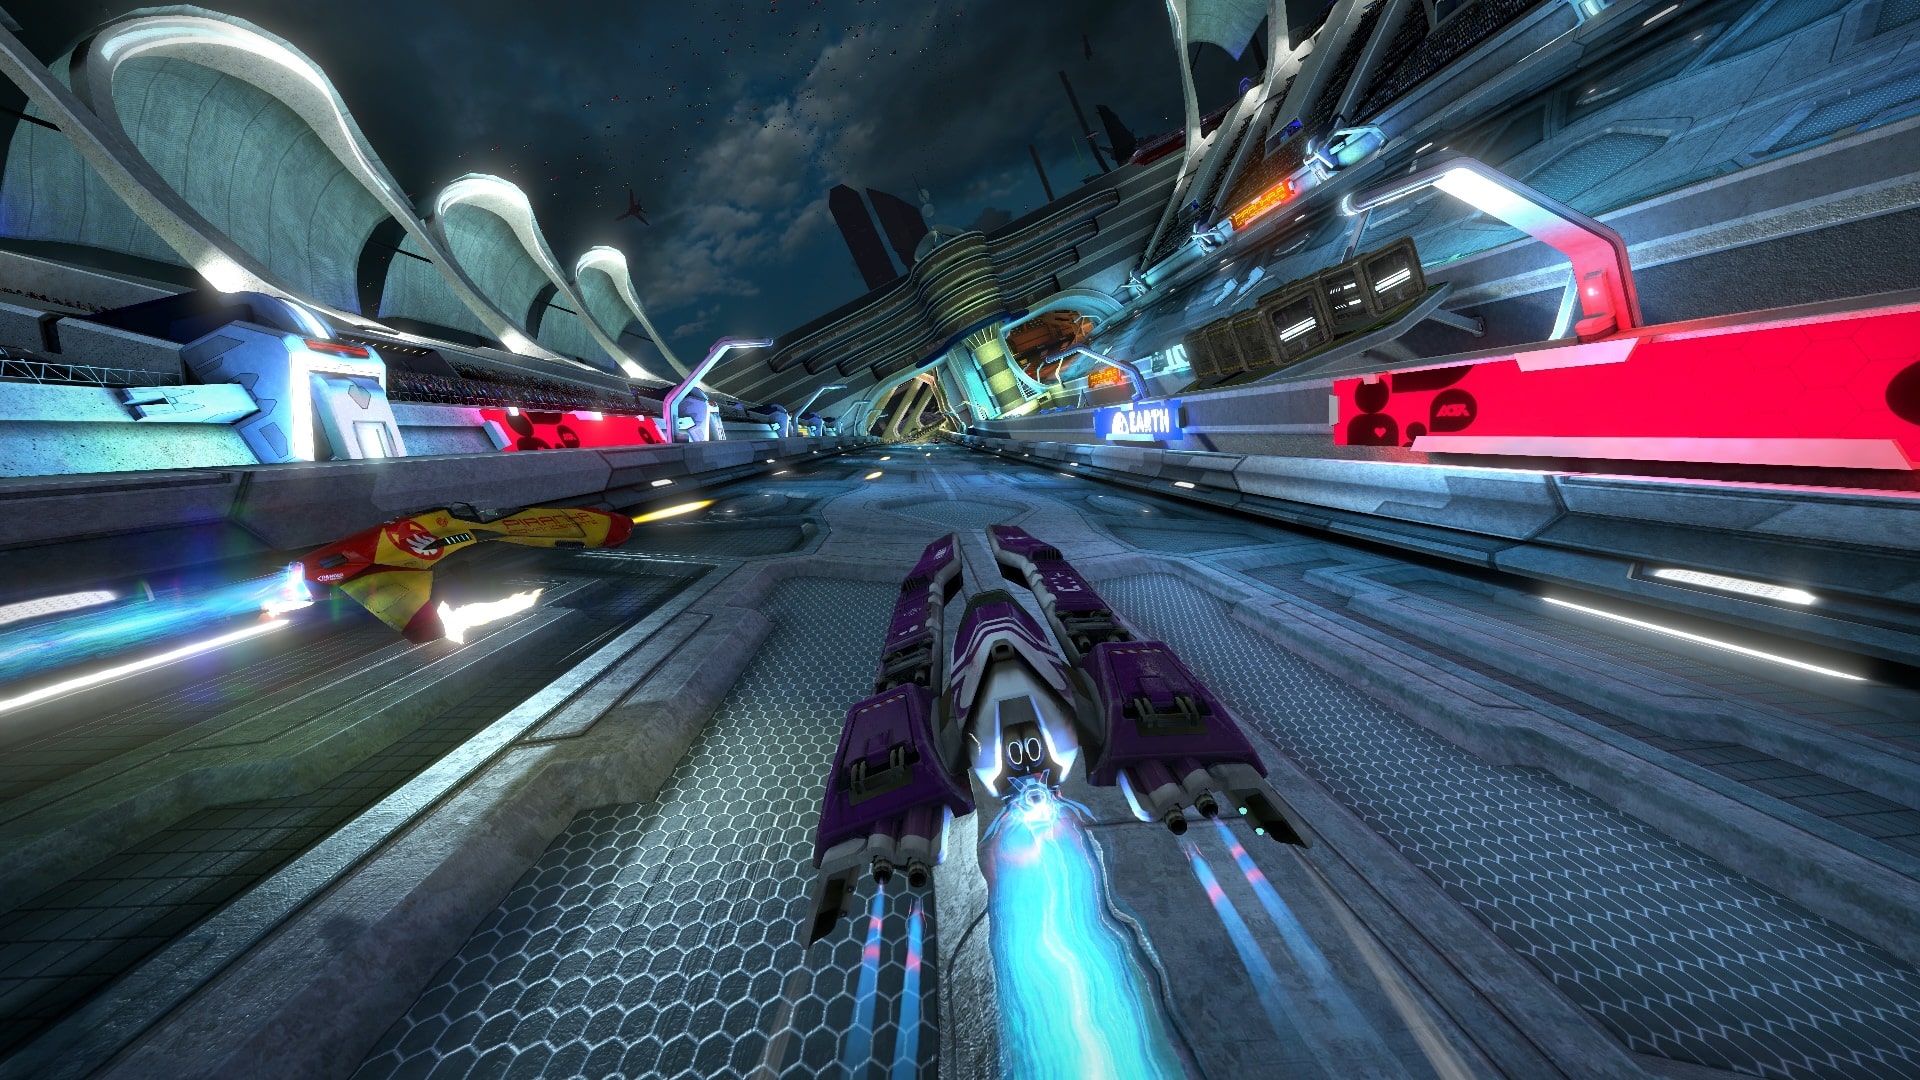 buy wipeout omega collection